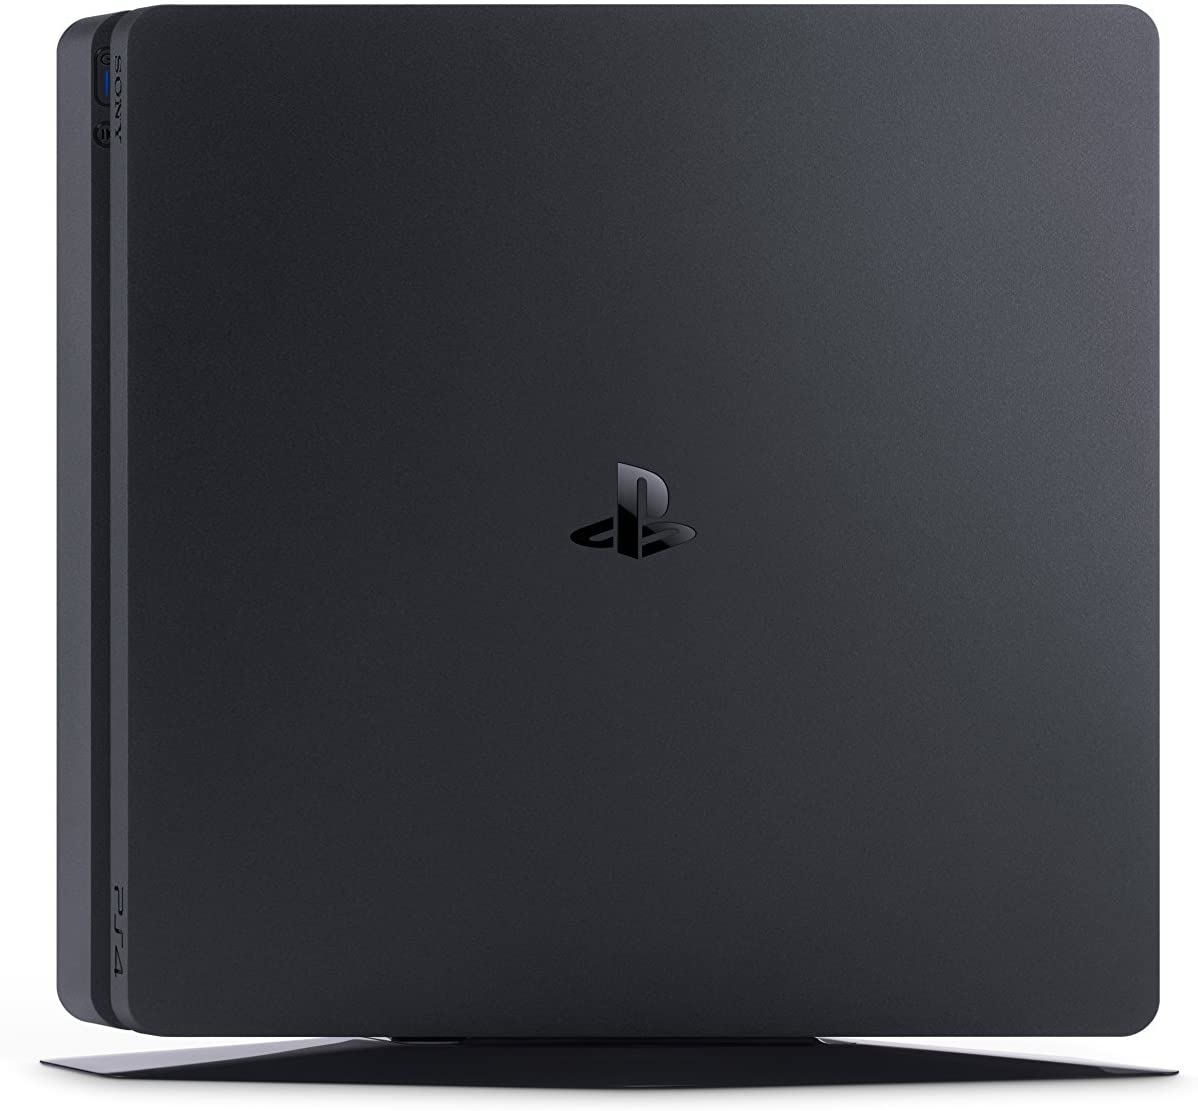 CyberGamers Upgraded PlayStation 4 Slim 2TB SSD Gaming Console